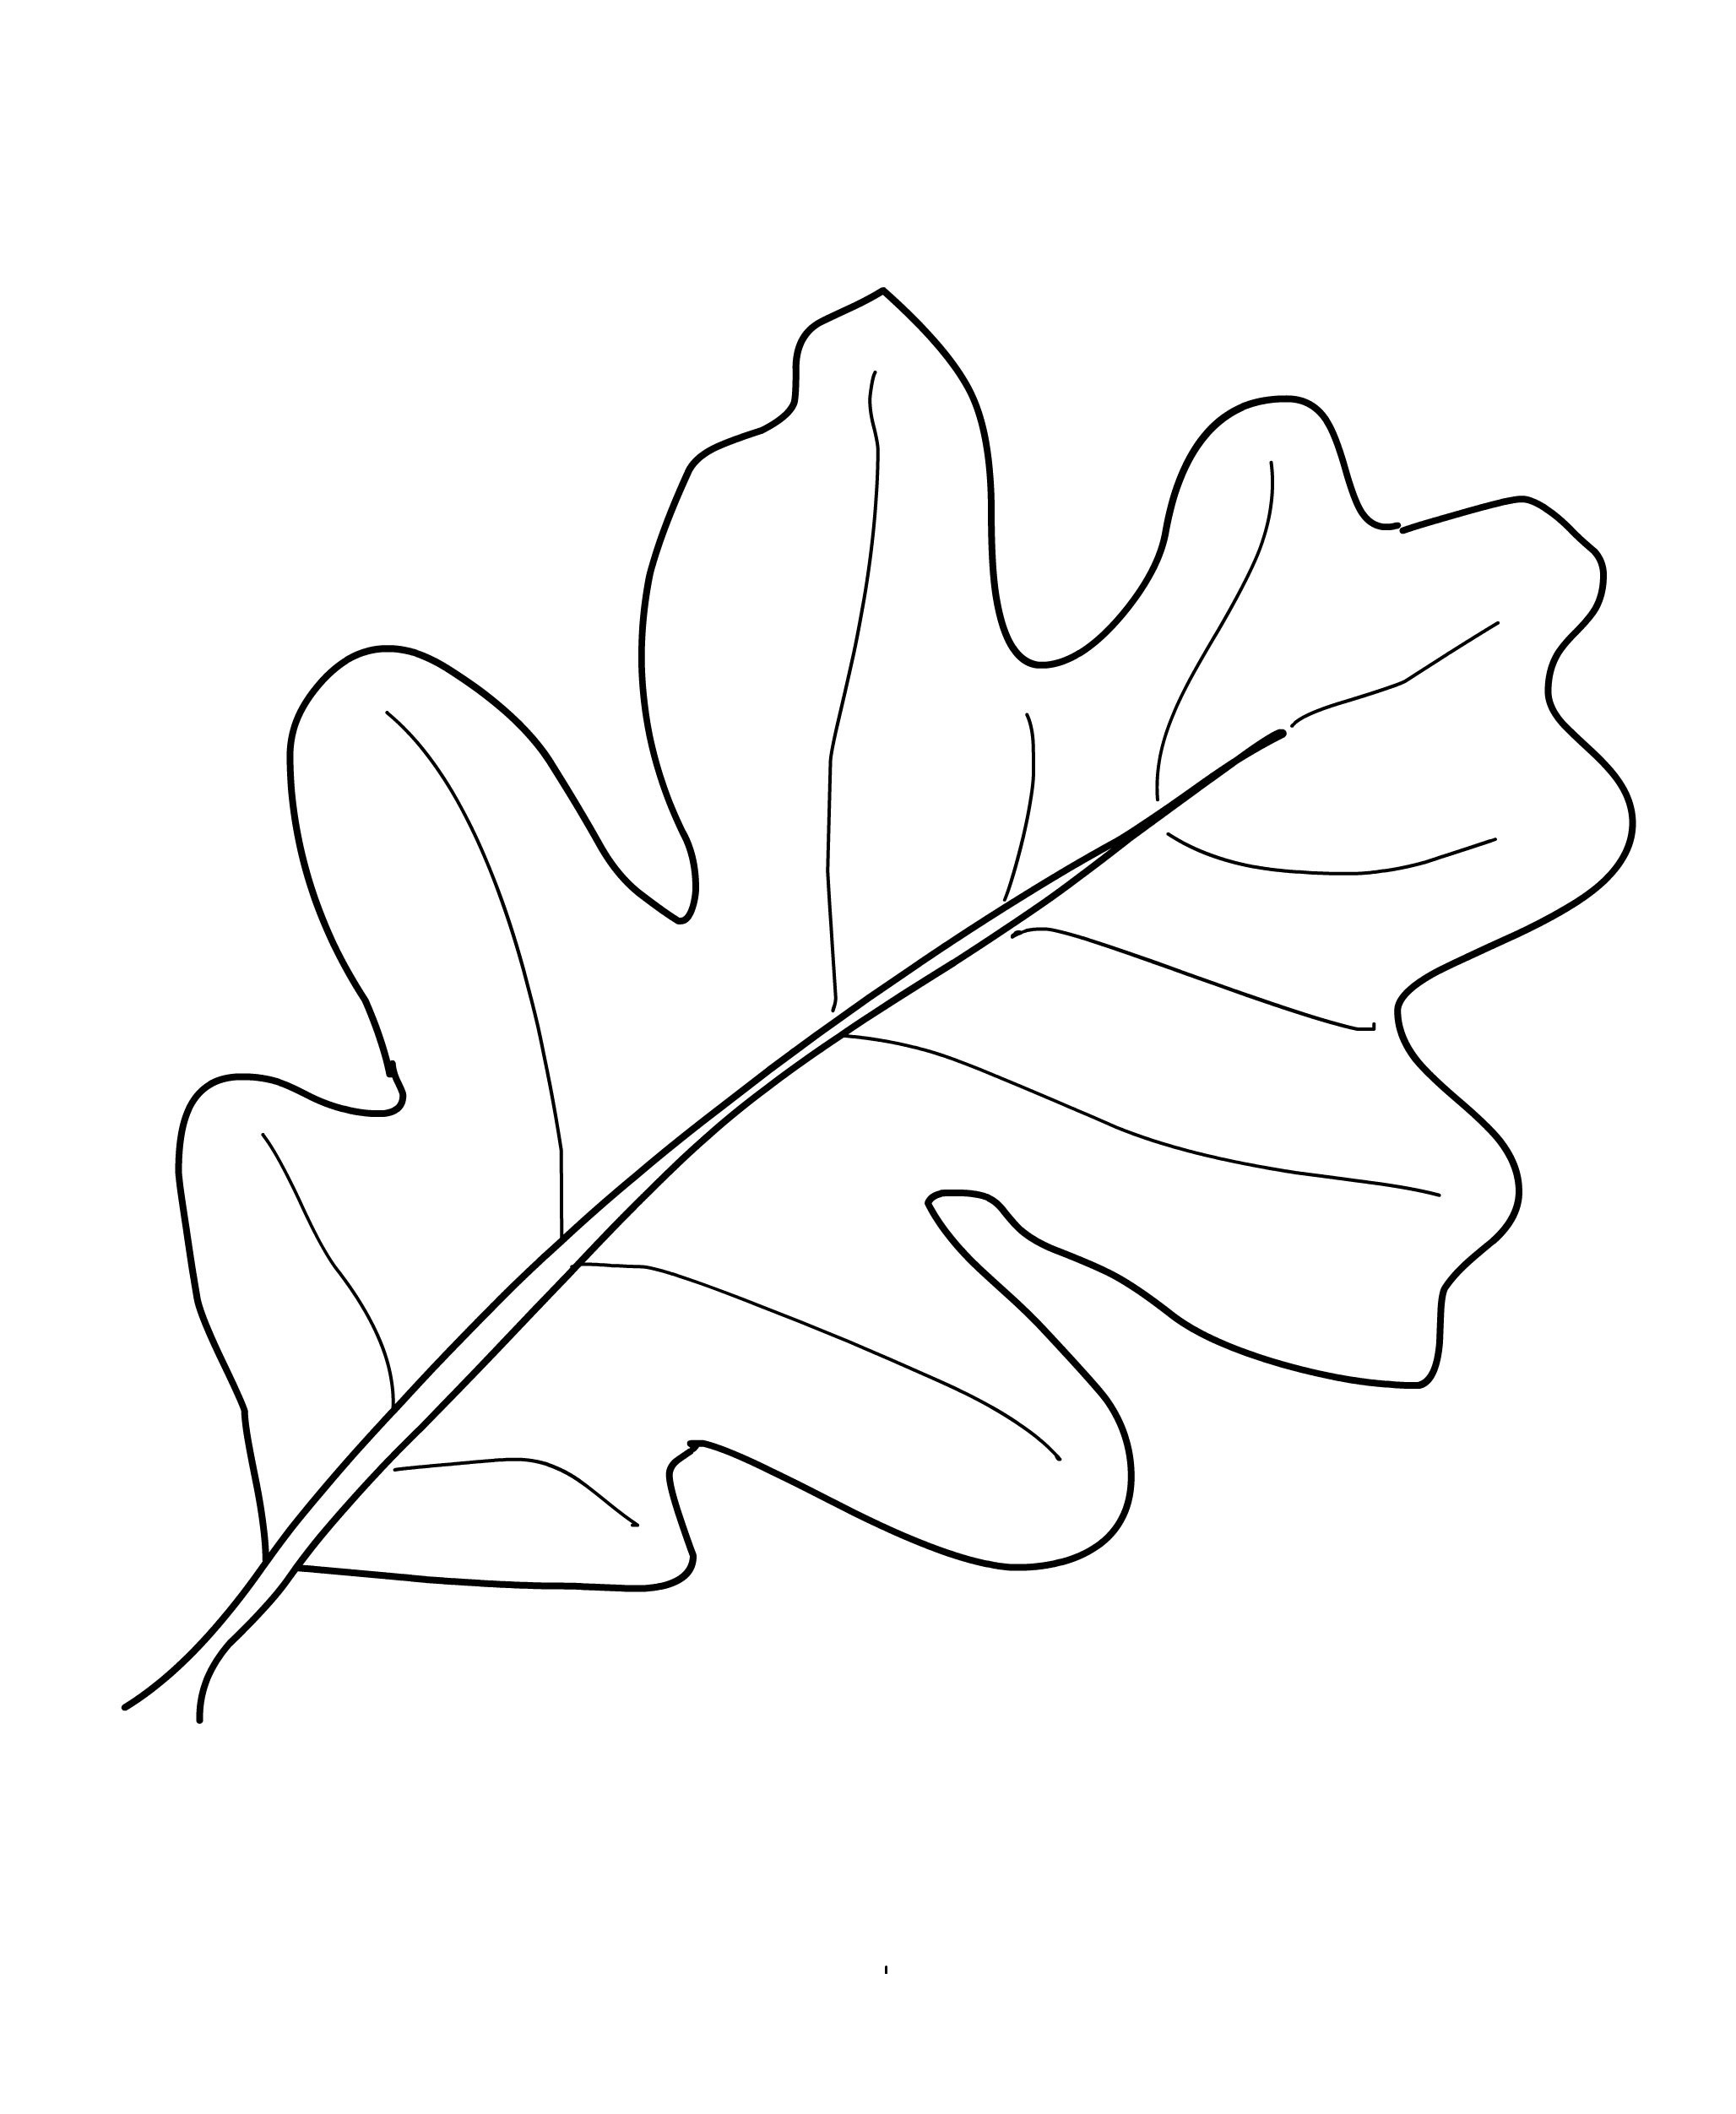 oak leaf nature coloring page for kids new leaves coloring pages download